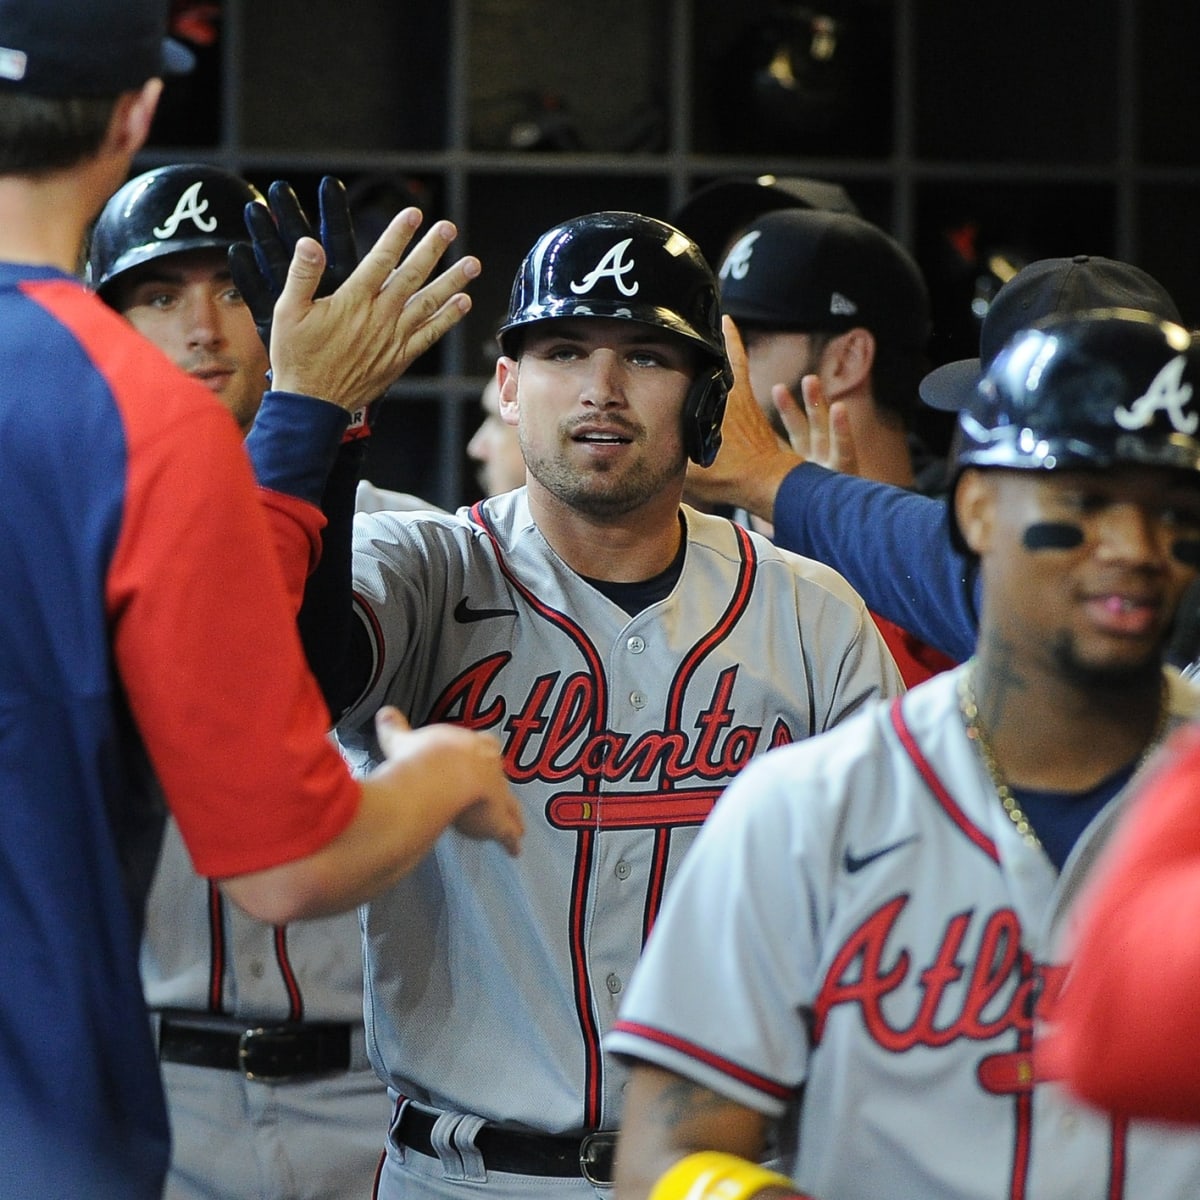 WATCH: Braves' Austin Riley Hits 429-Foot Home Run Against Brewers